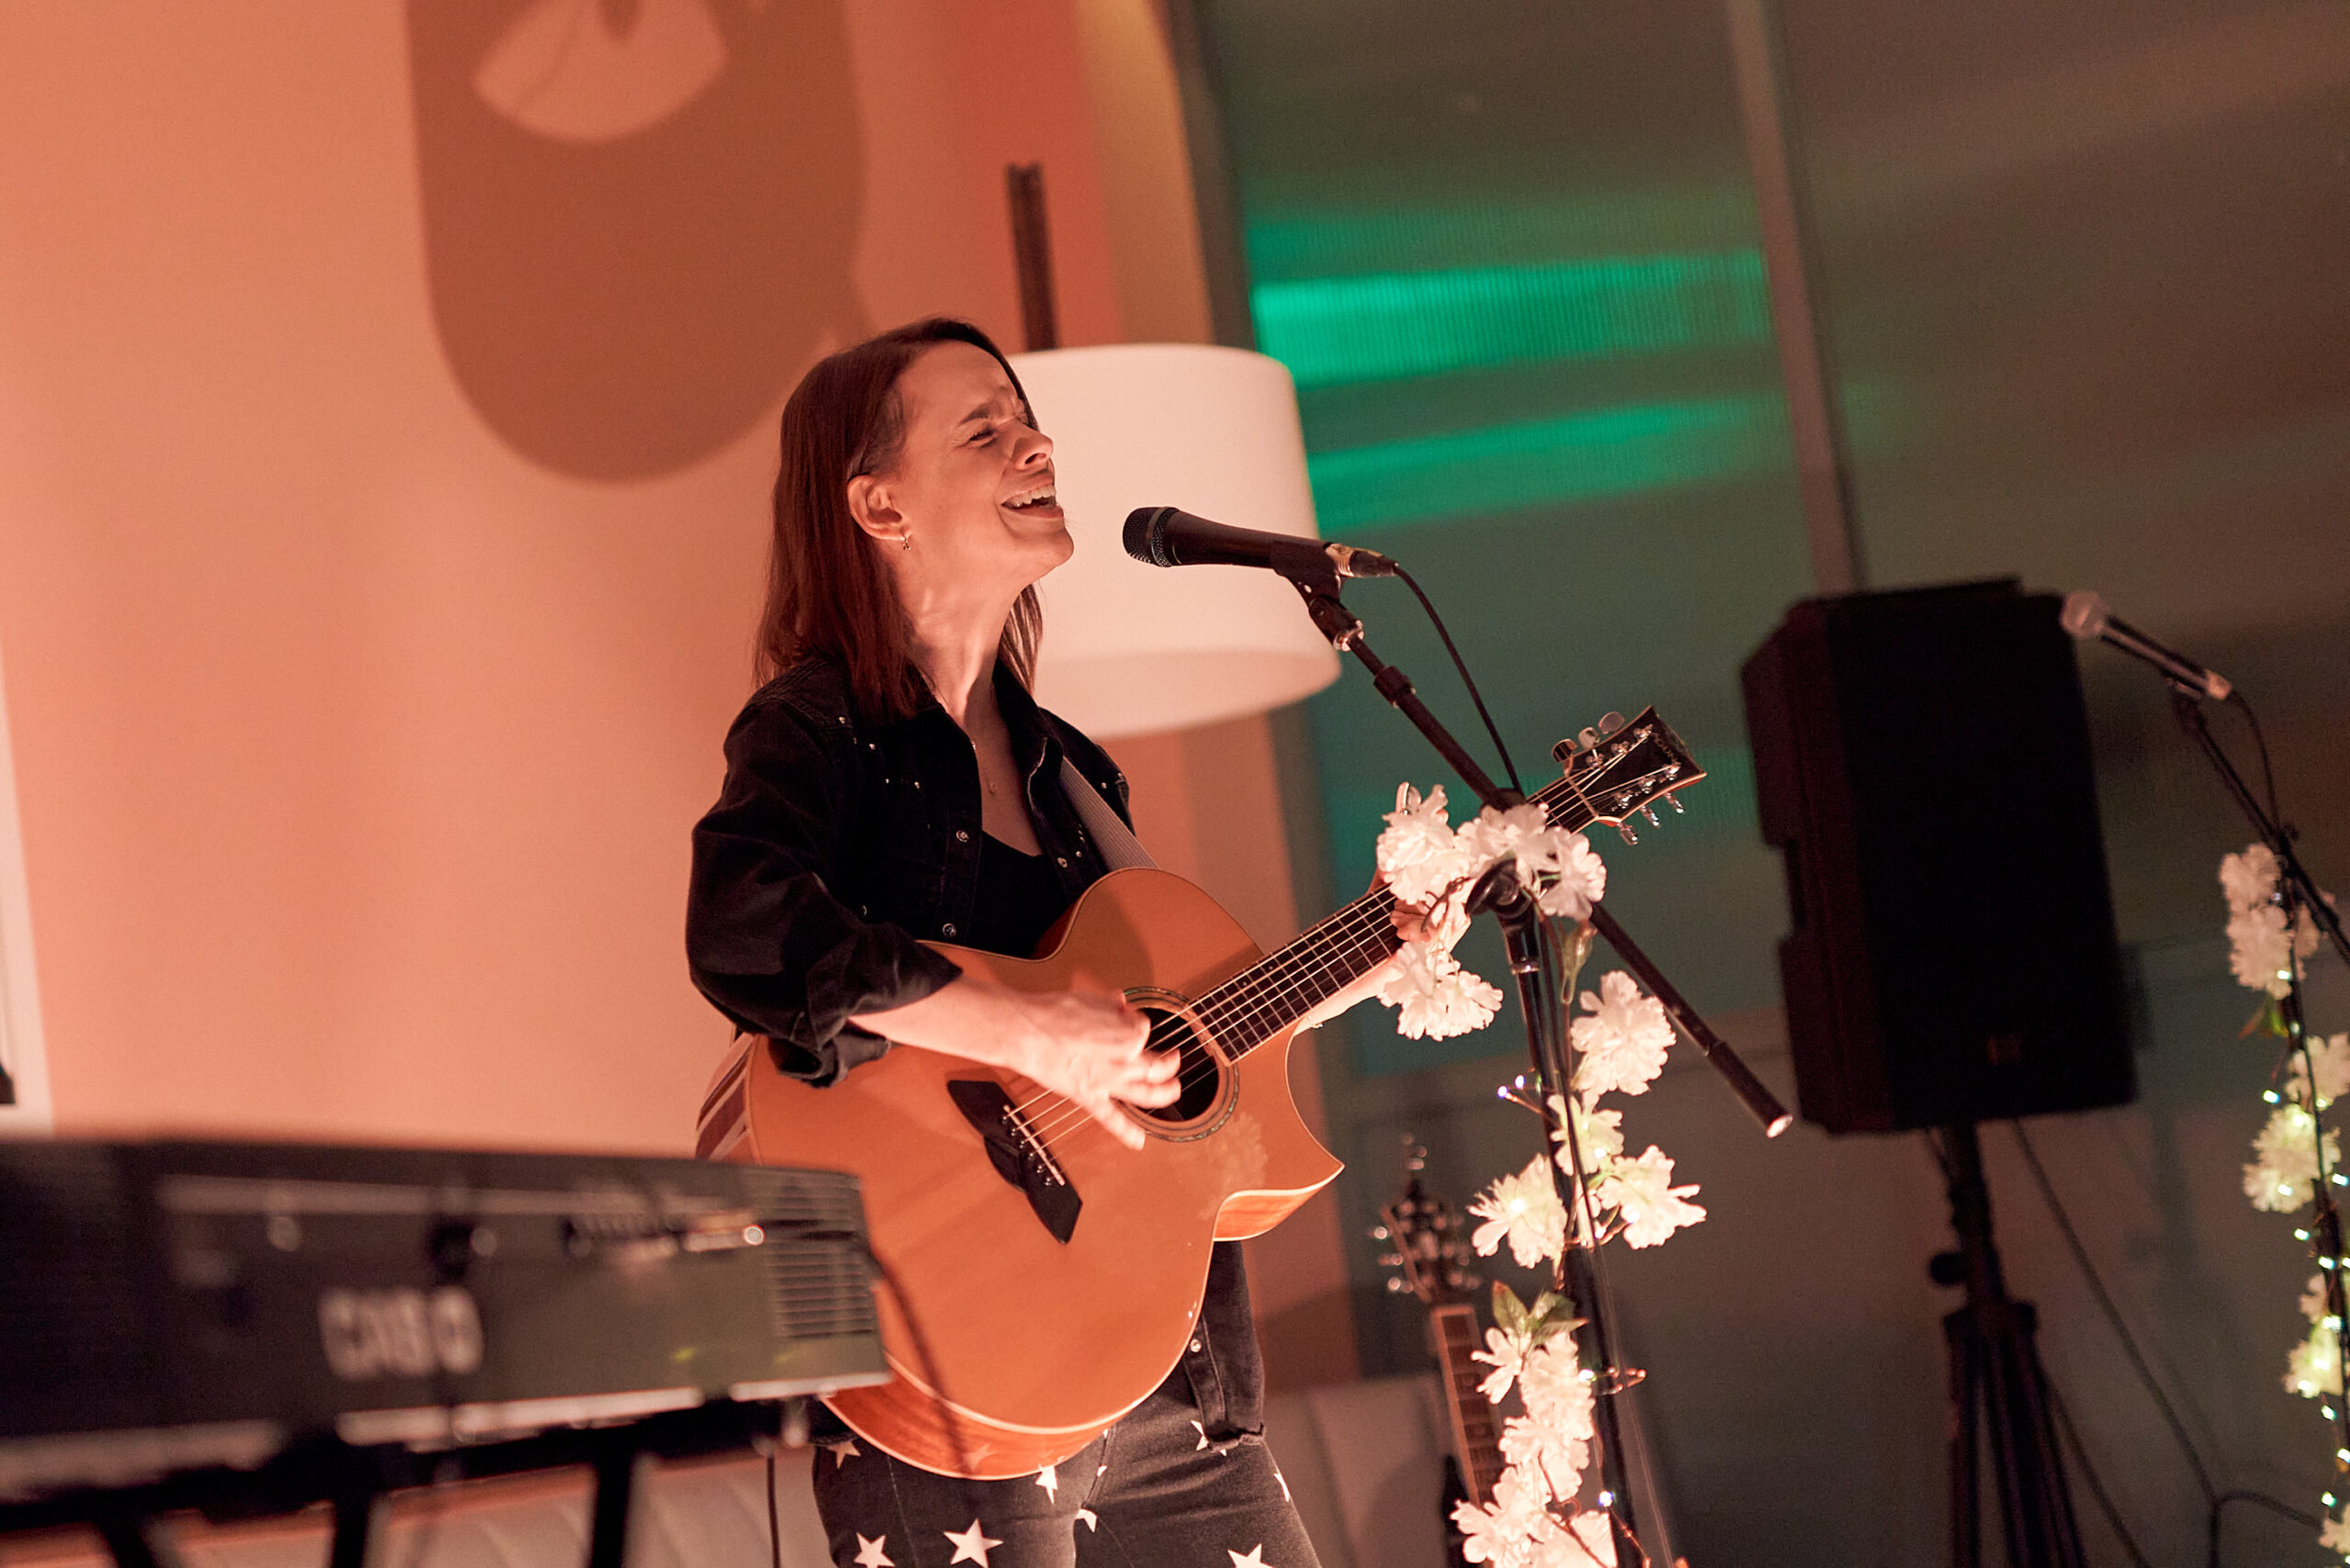 Woman singing and playing guitar